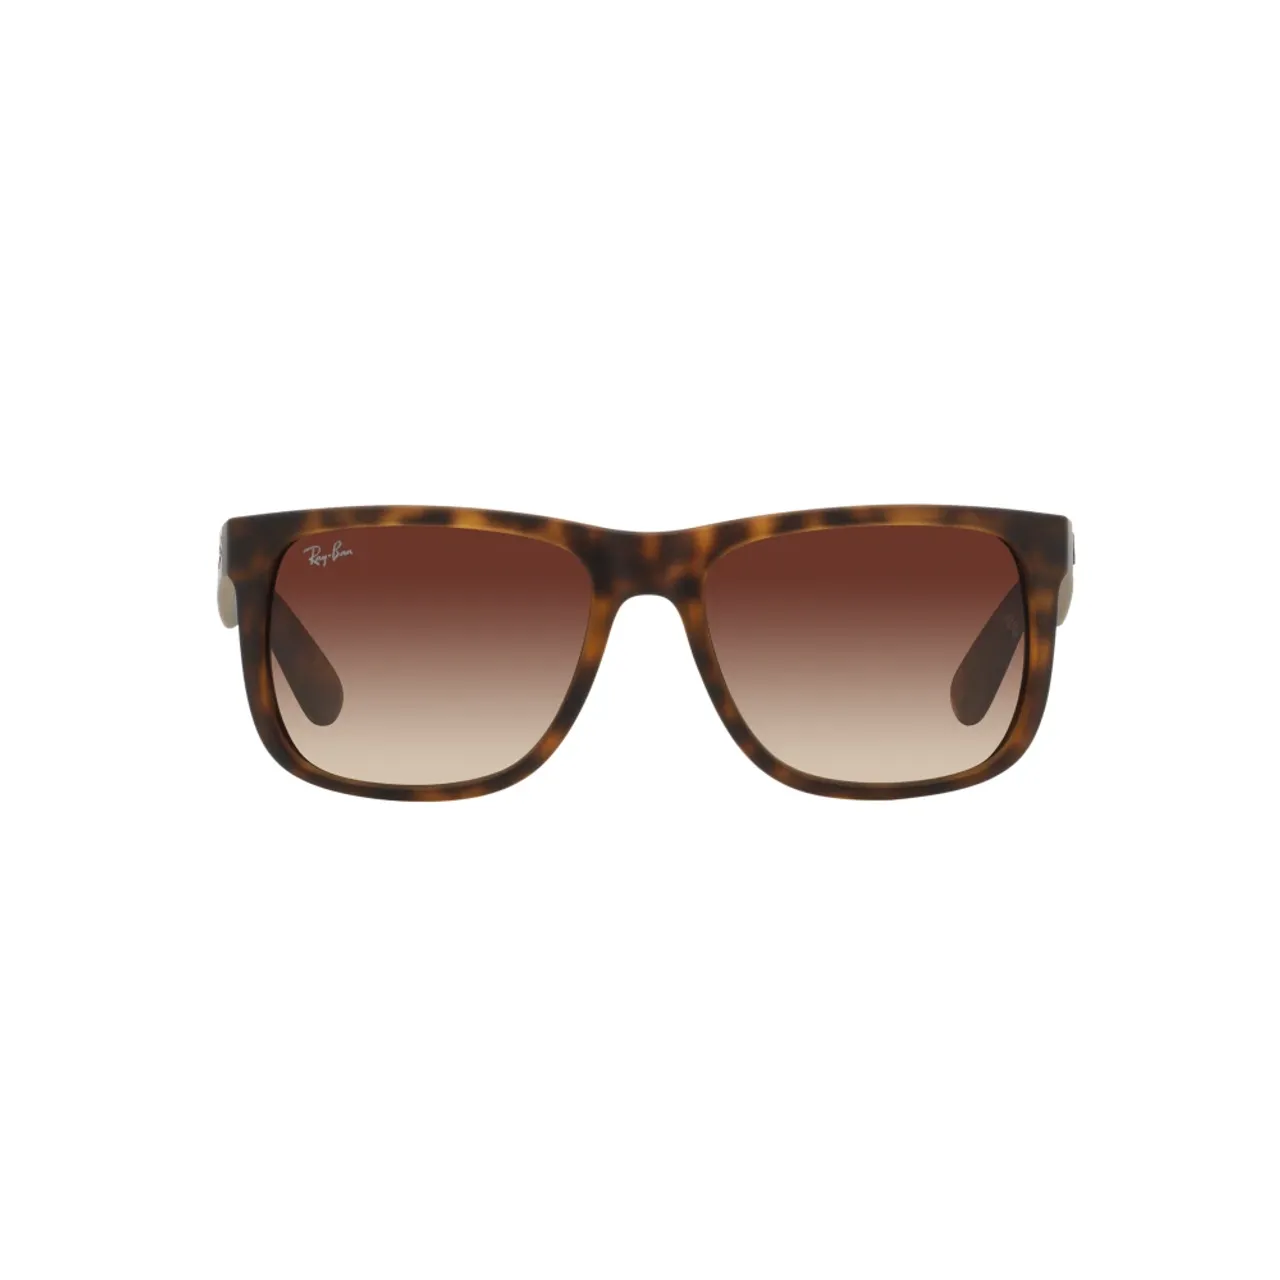 Ray-Ban , RB Justin Sunglasses in Havana Brown ,Brown male, Sizes: